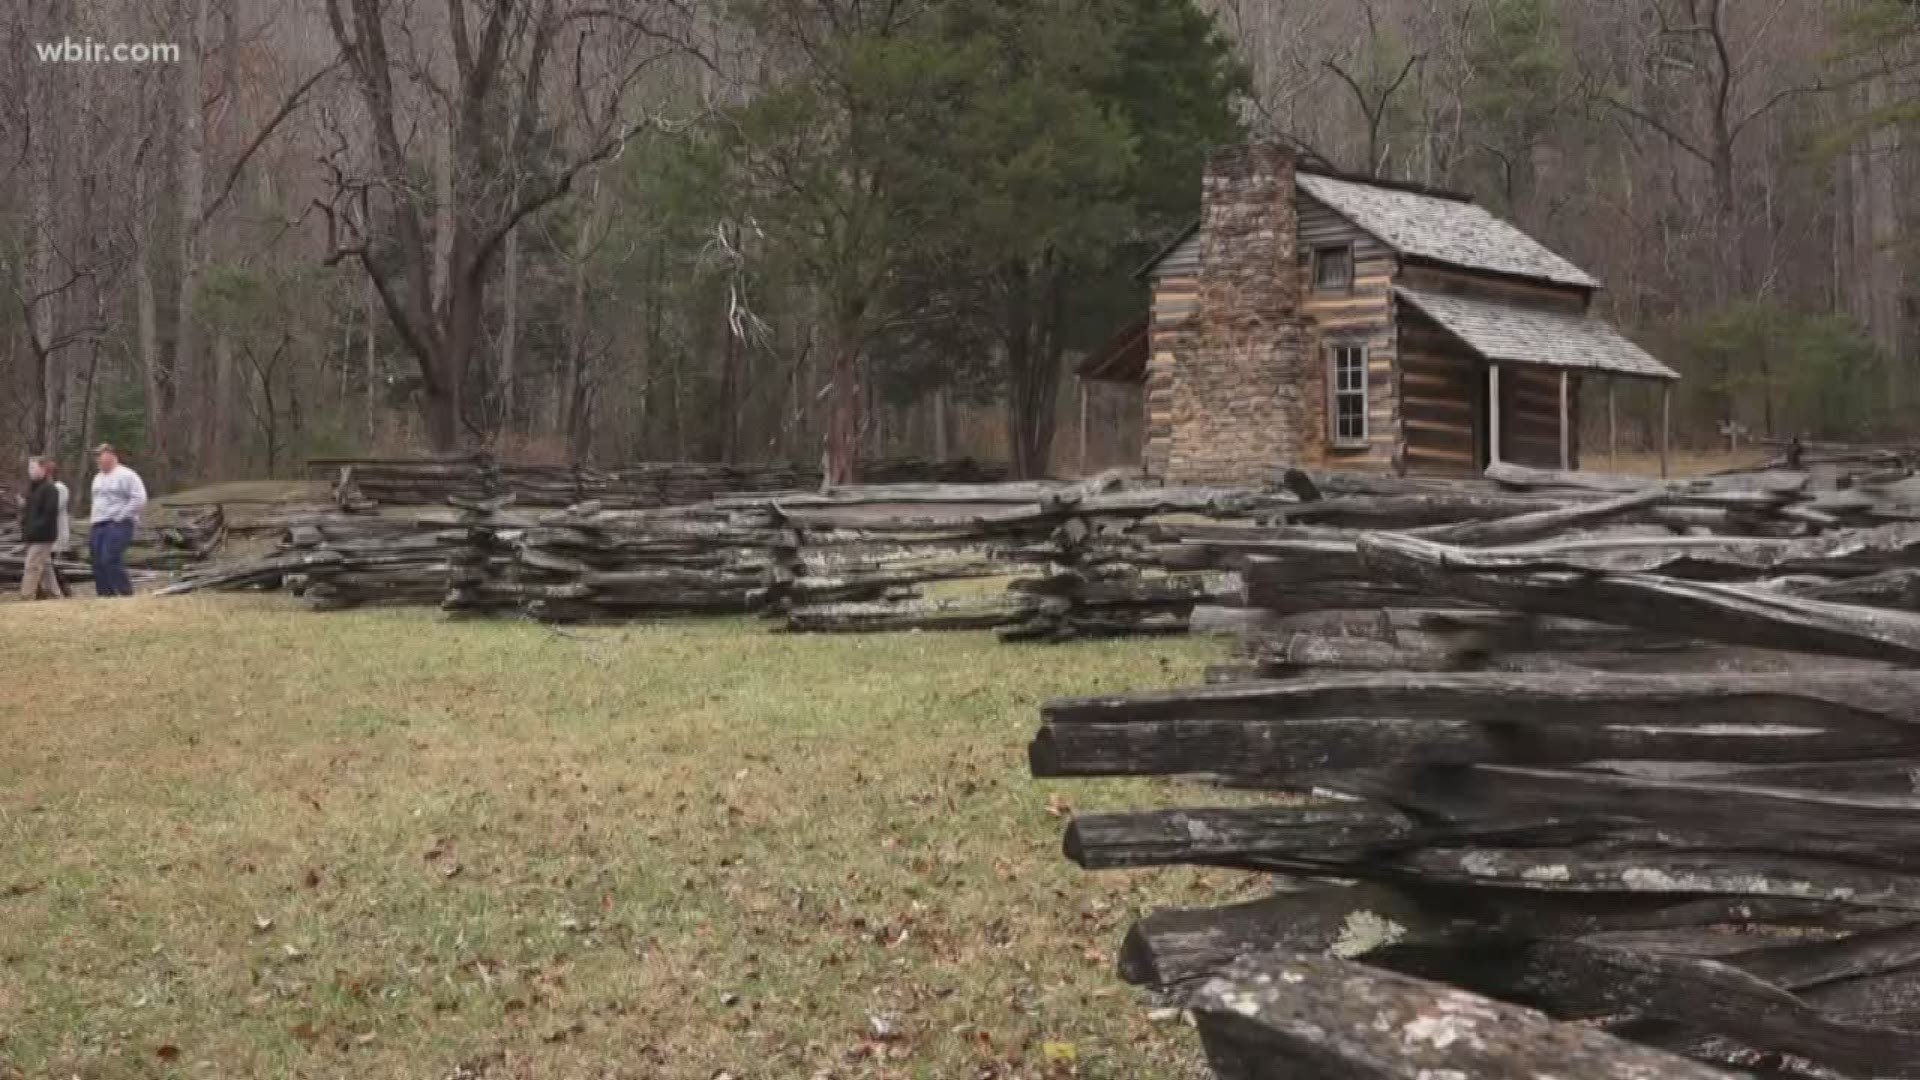 The non-profit Friends of the Smokies is making a final push to raise the money to make the John Oliver cabin in Cades Cove accessible to people with disabilities.